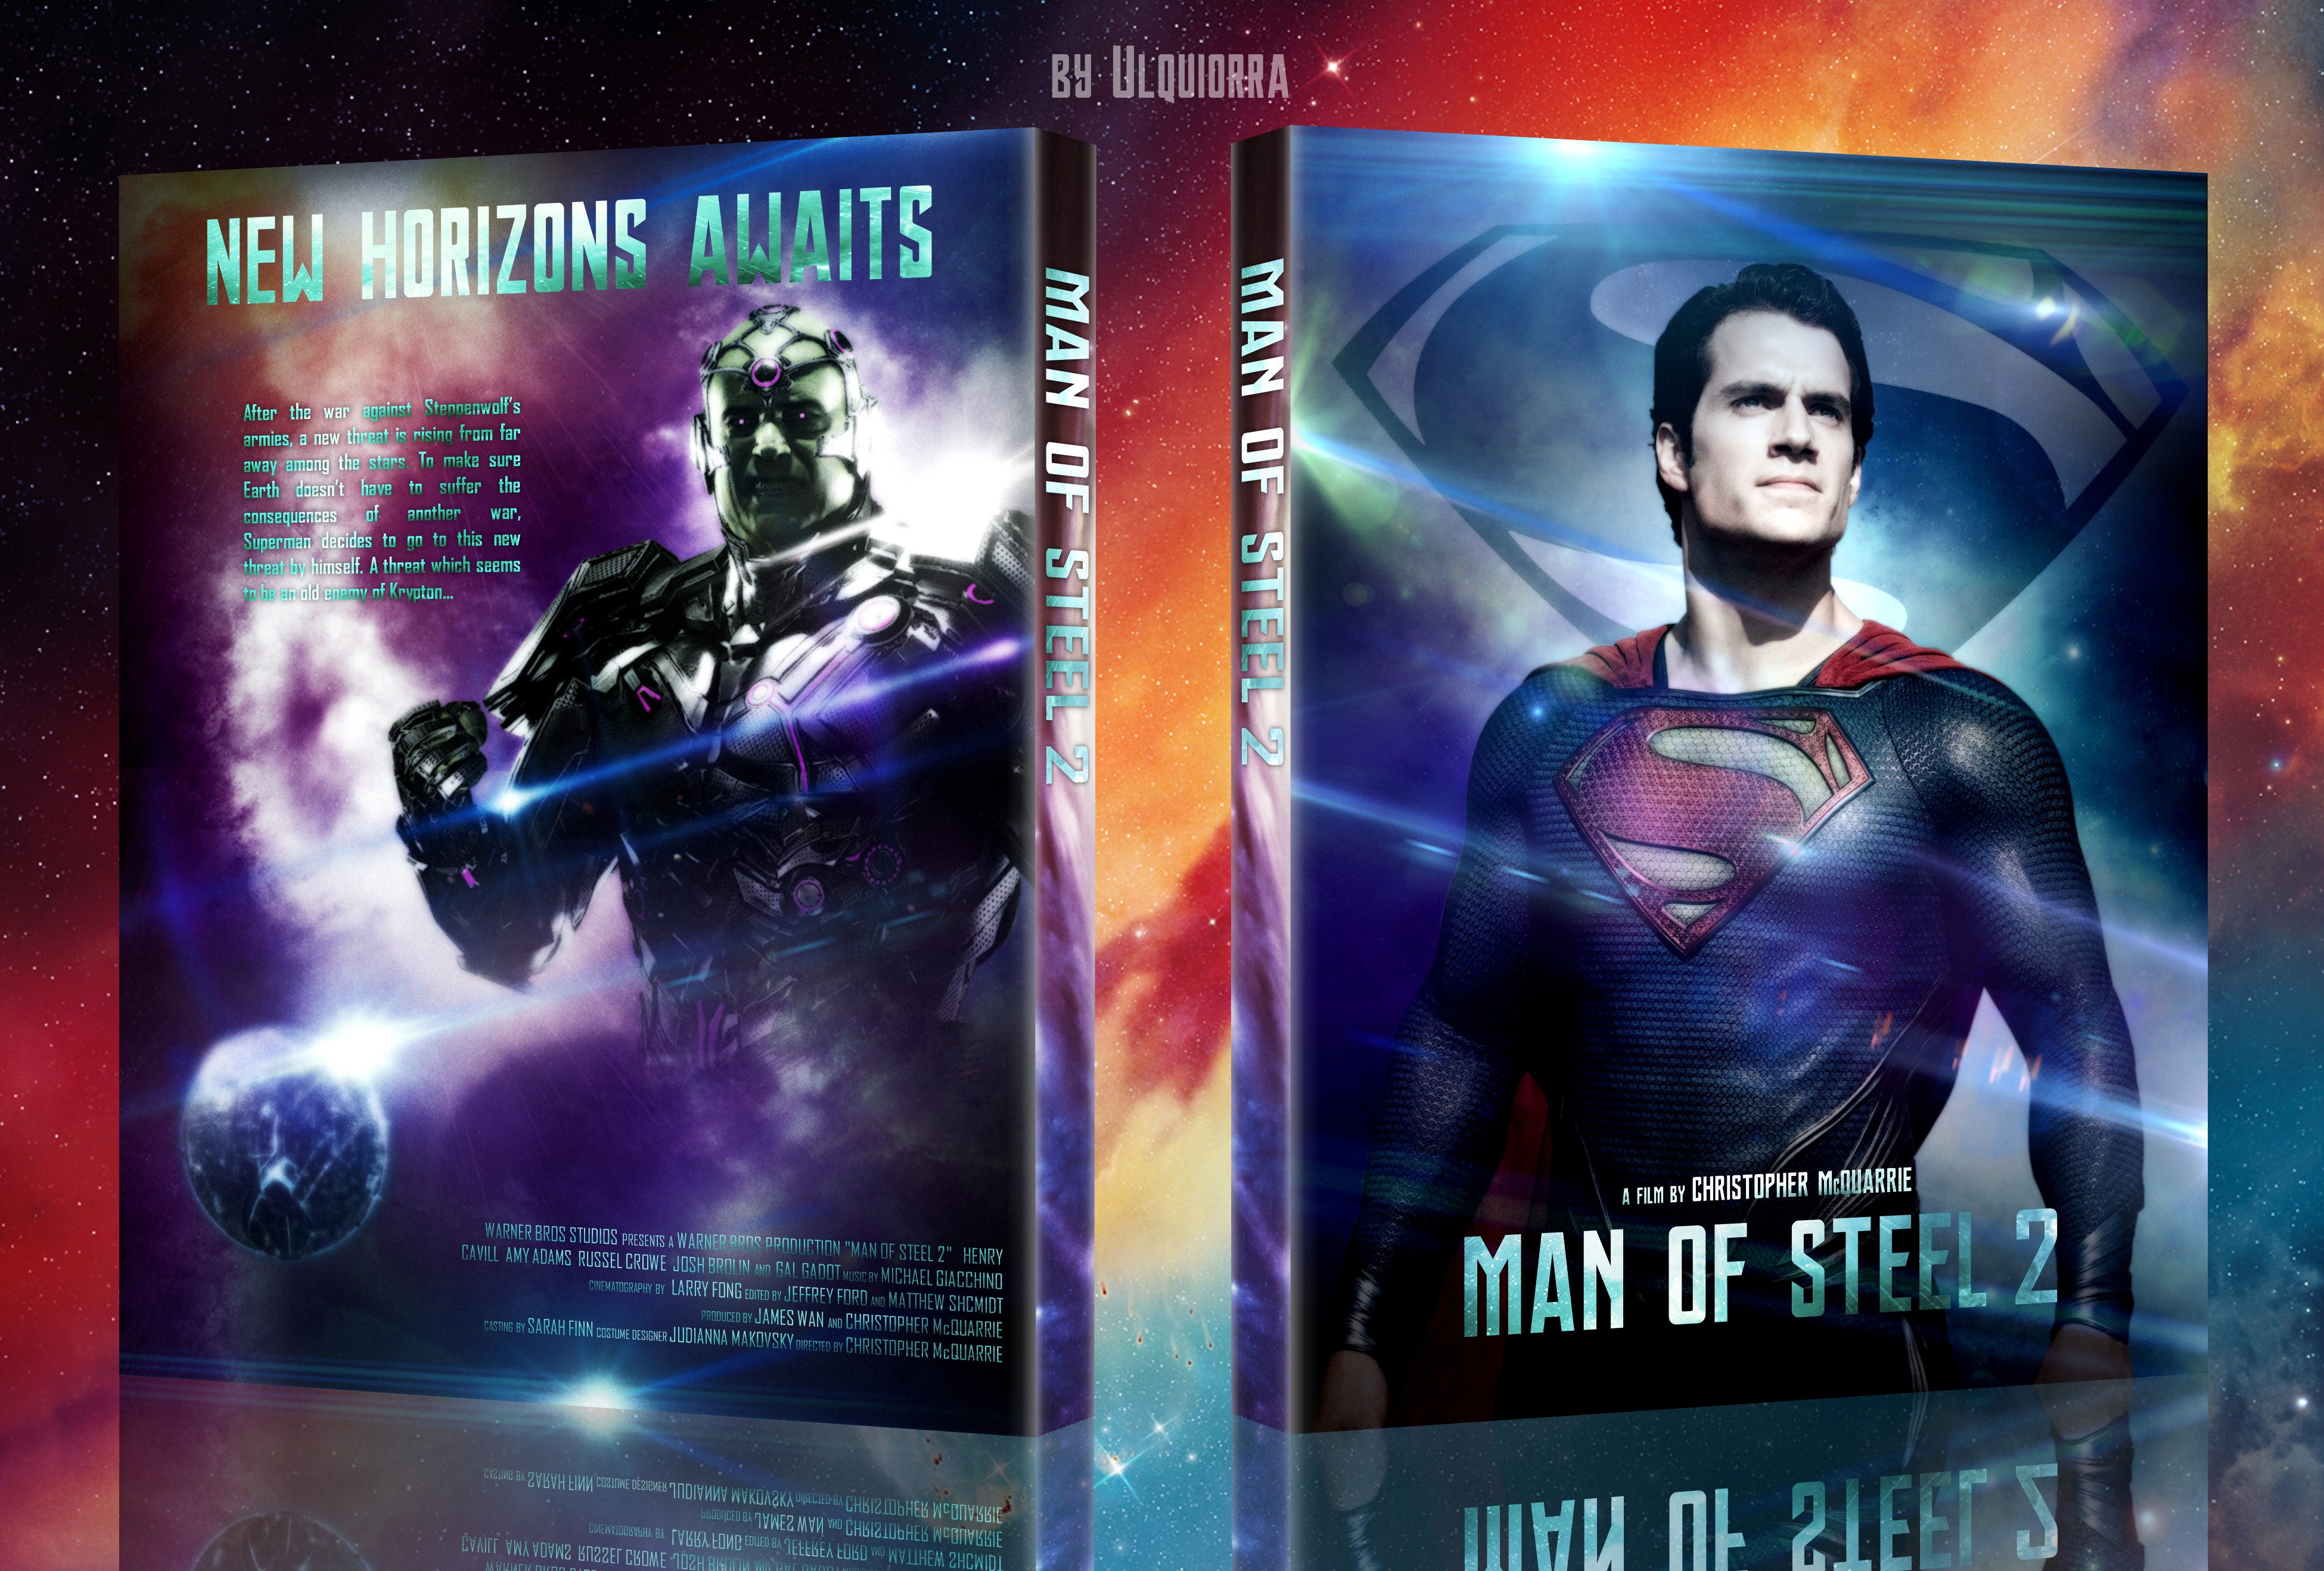 Man of Steel 2 box cover